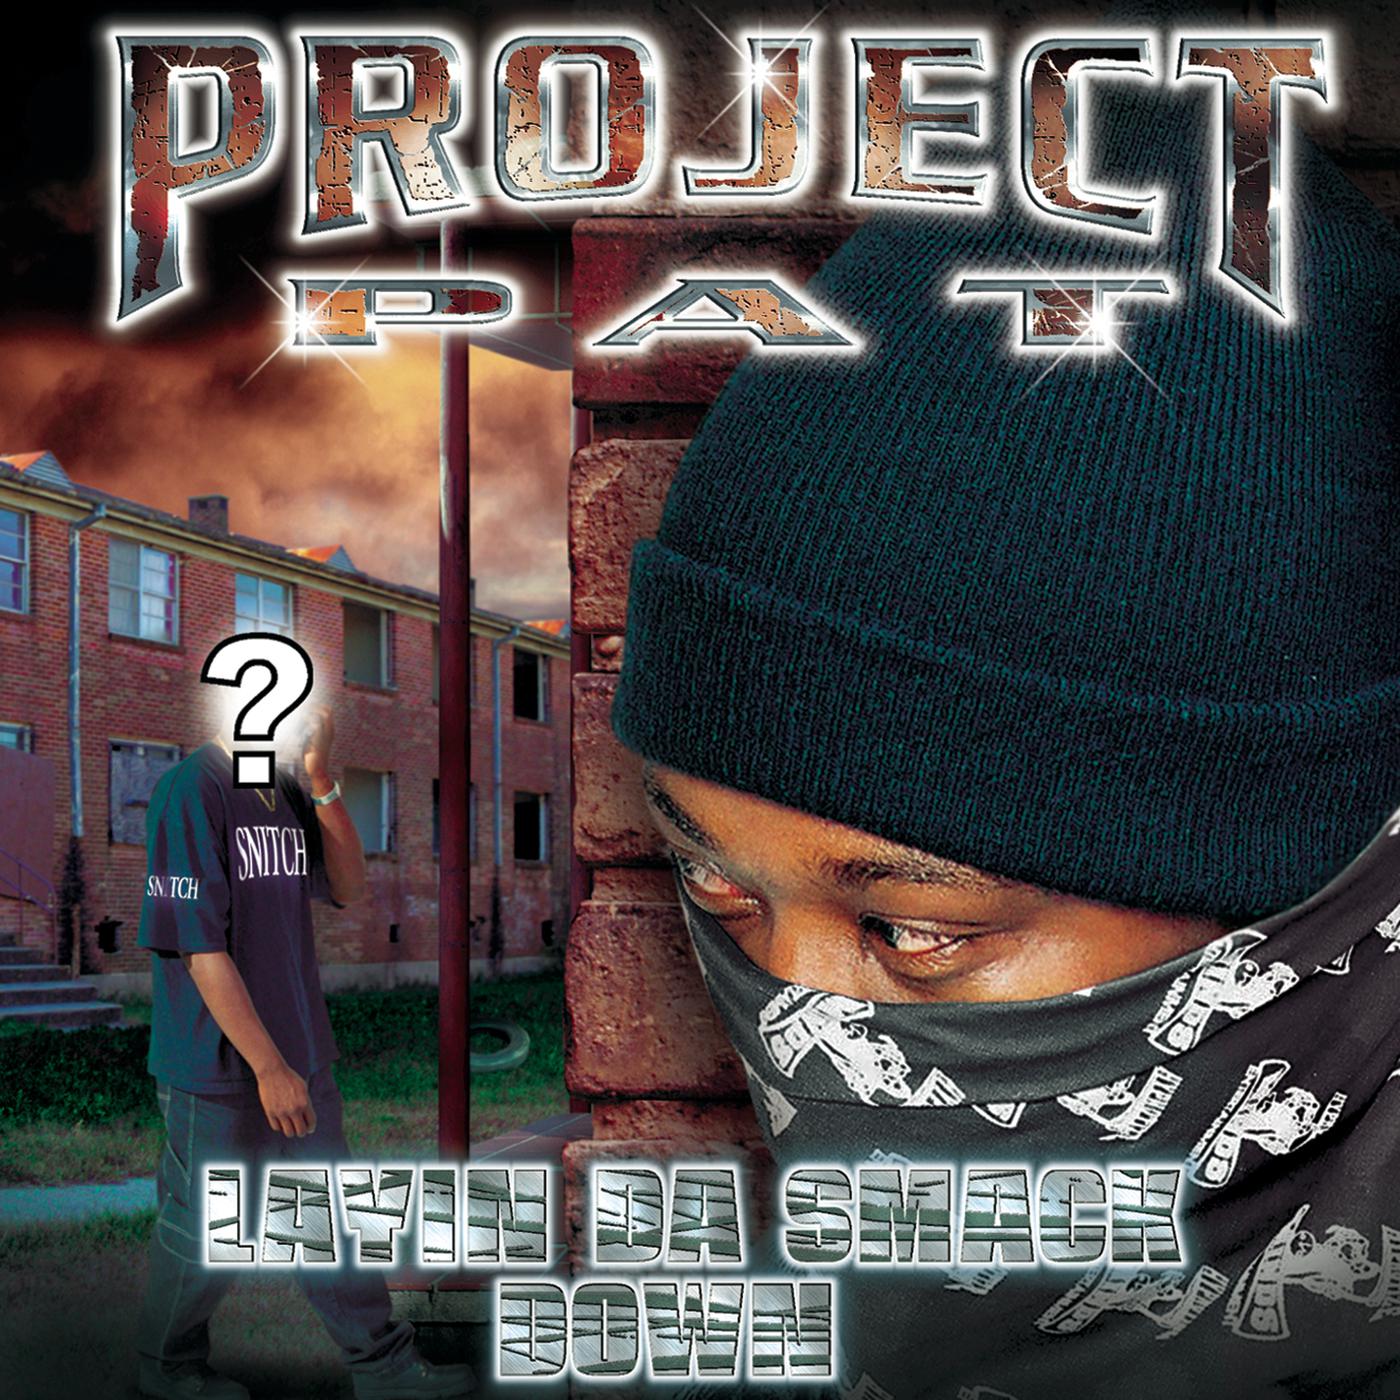 project pat ooh nuthin download